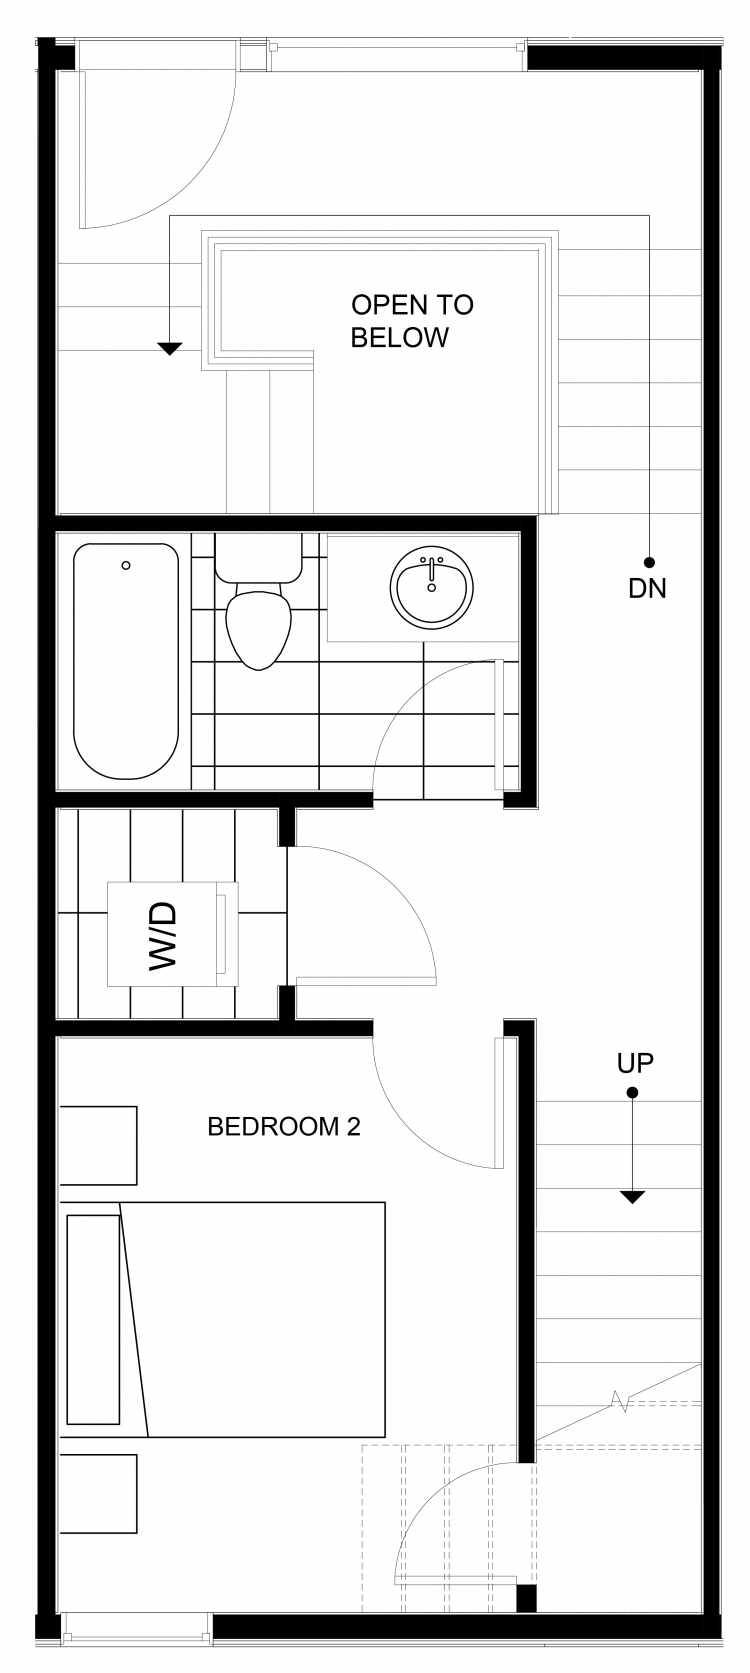 Second Floor Plan of 1541 Grandview Pl E, One of the Larrabee Townhomes in Capitol Hill